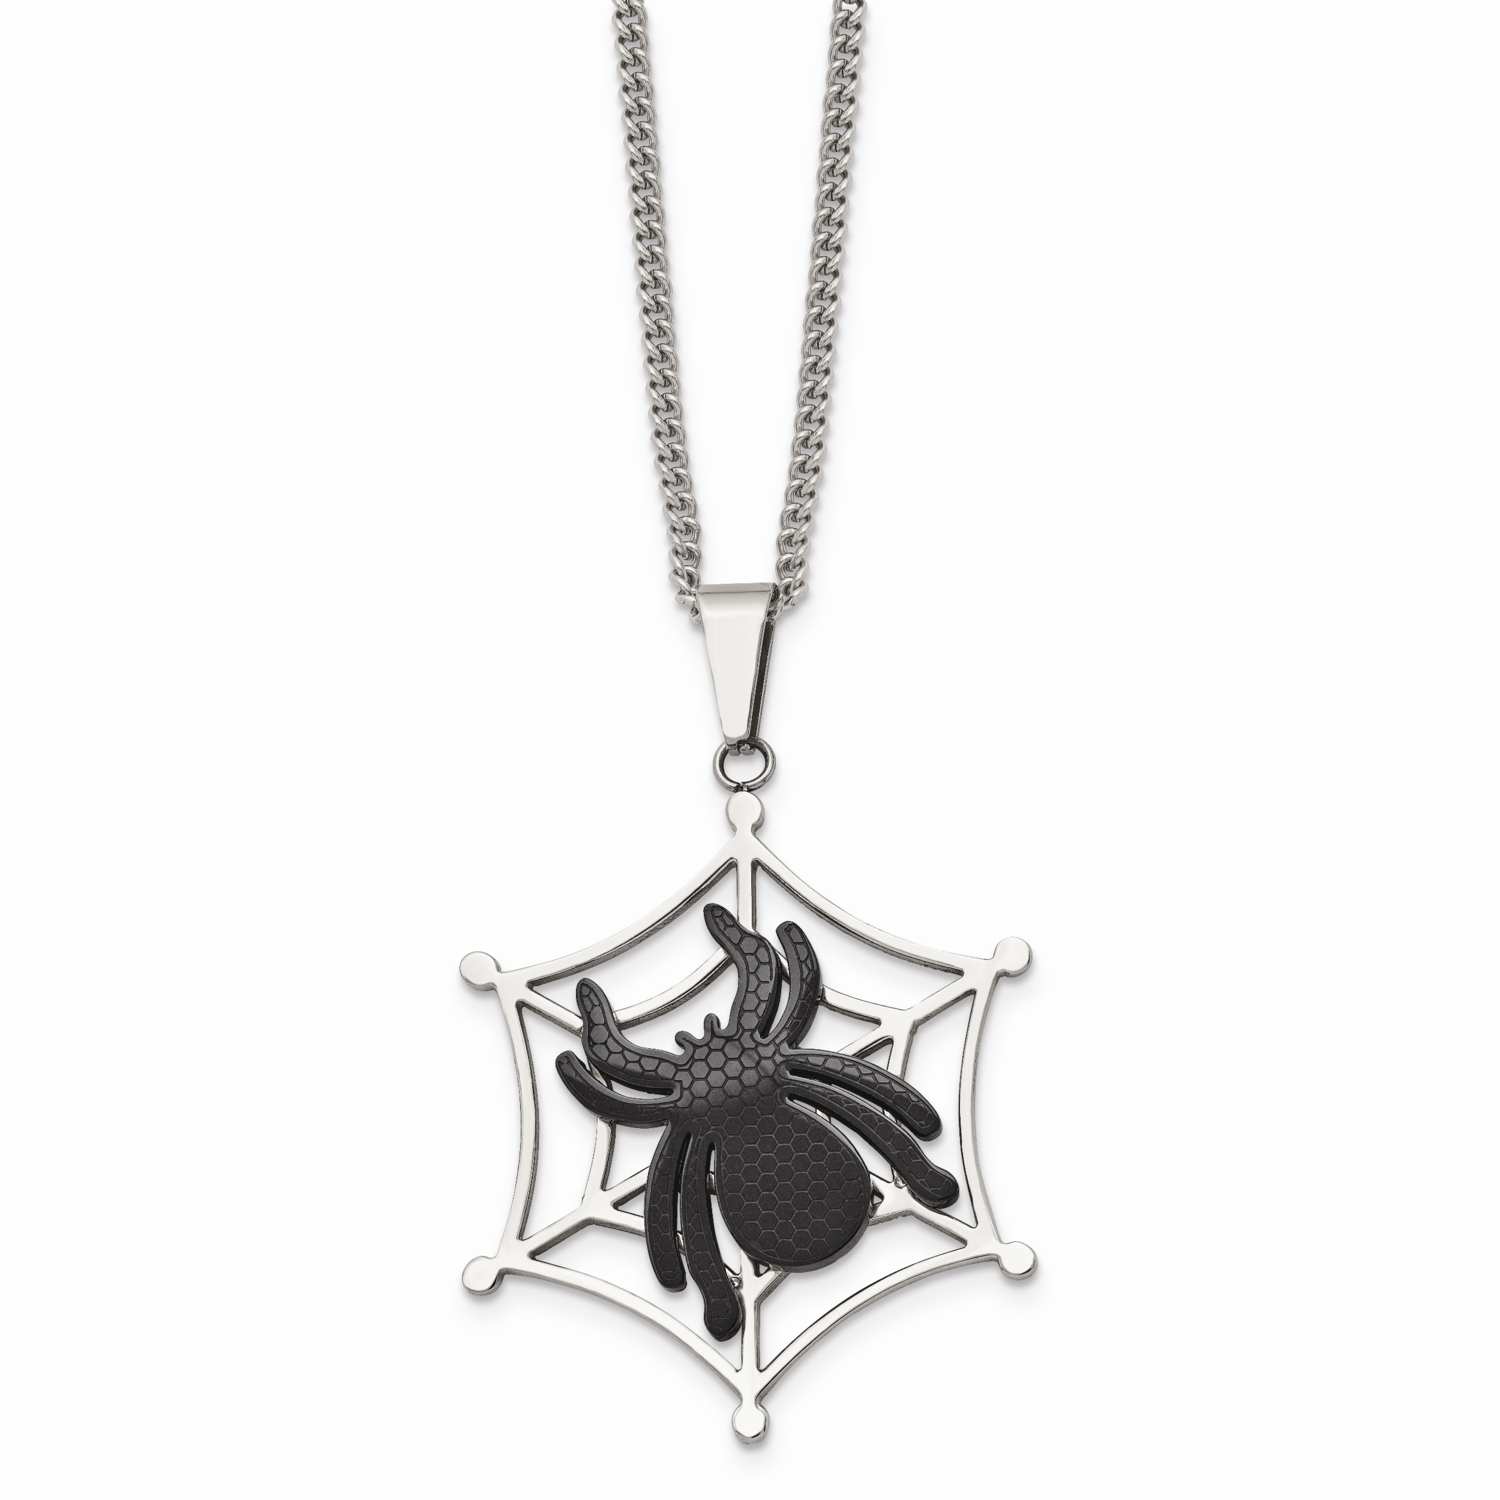 IP Black-plated Spider & Polished Web Necklace Stainless Steel SRN941-22